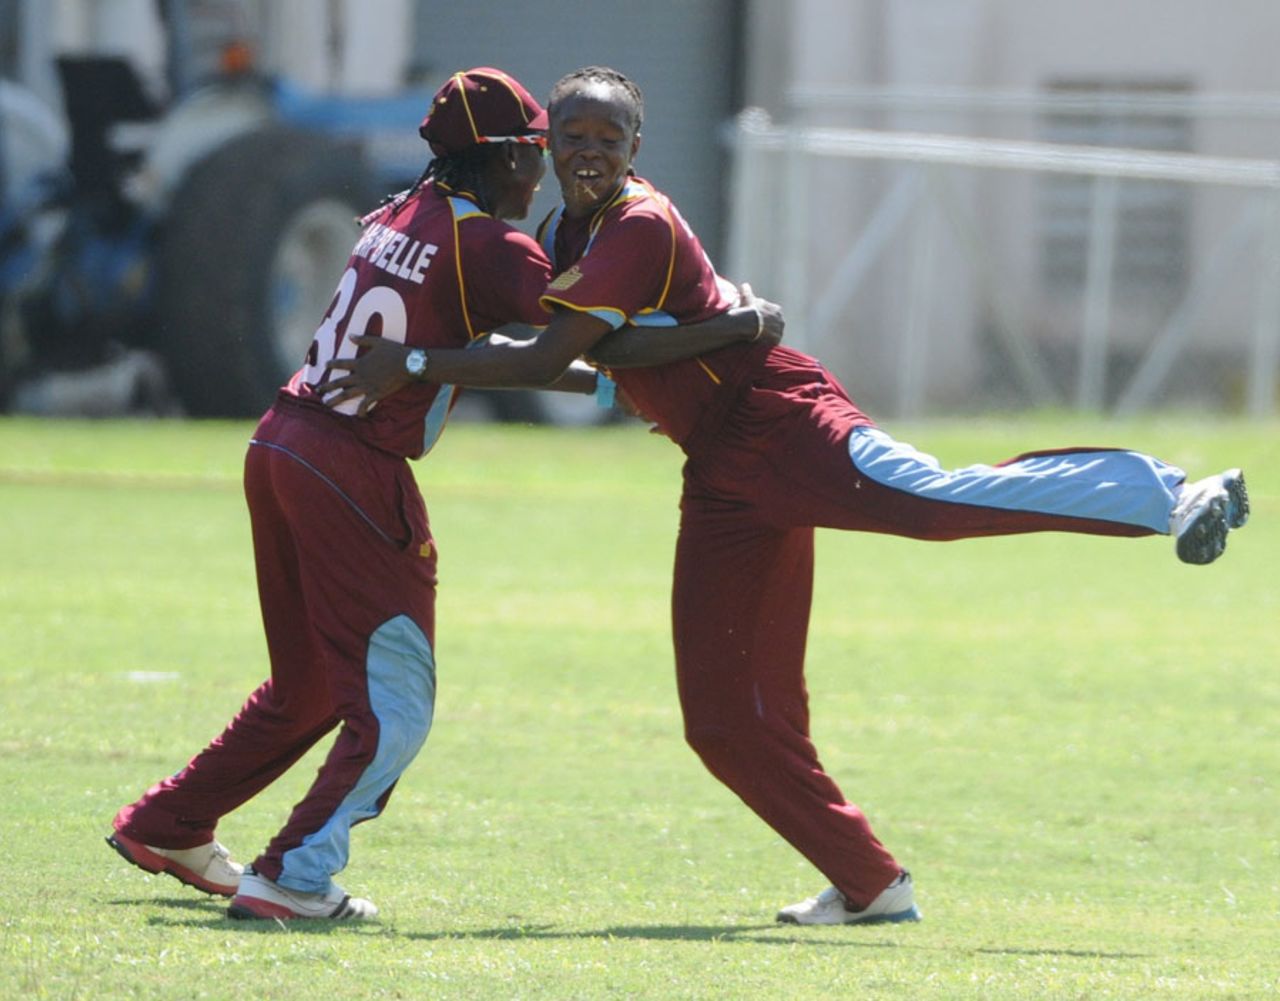 Shaquana Quintyne took two wickets and led a 43-run stand for the ninth wicket, West Indies v New Zealand, 2nd Women's ODI, Kingston, October 8, 2013